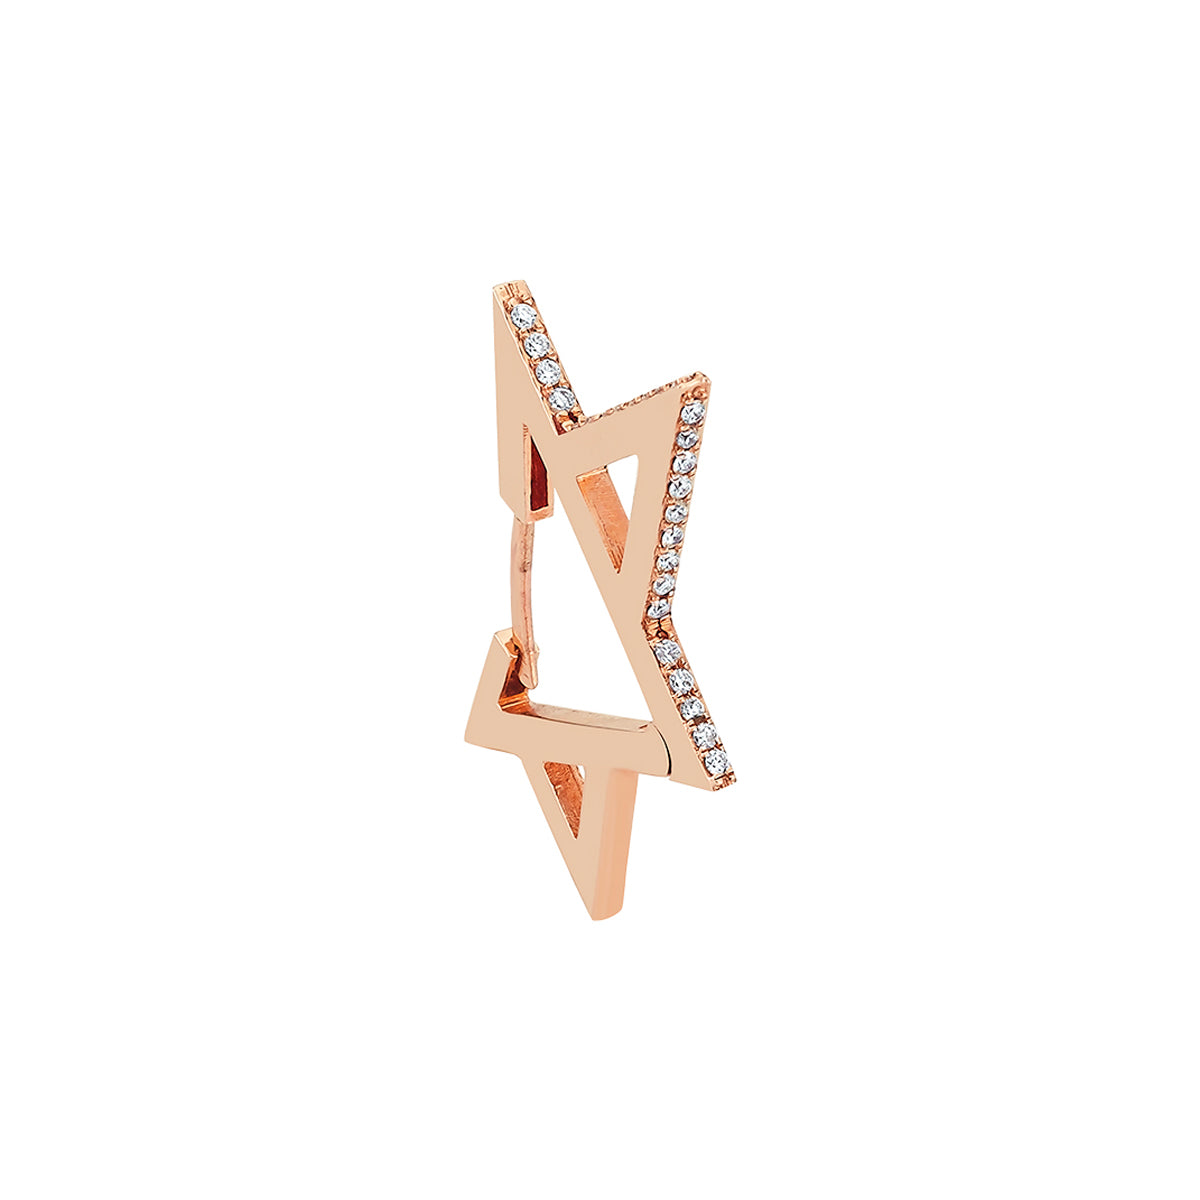 Star Earring in Rose Gold - Her Story Shop